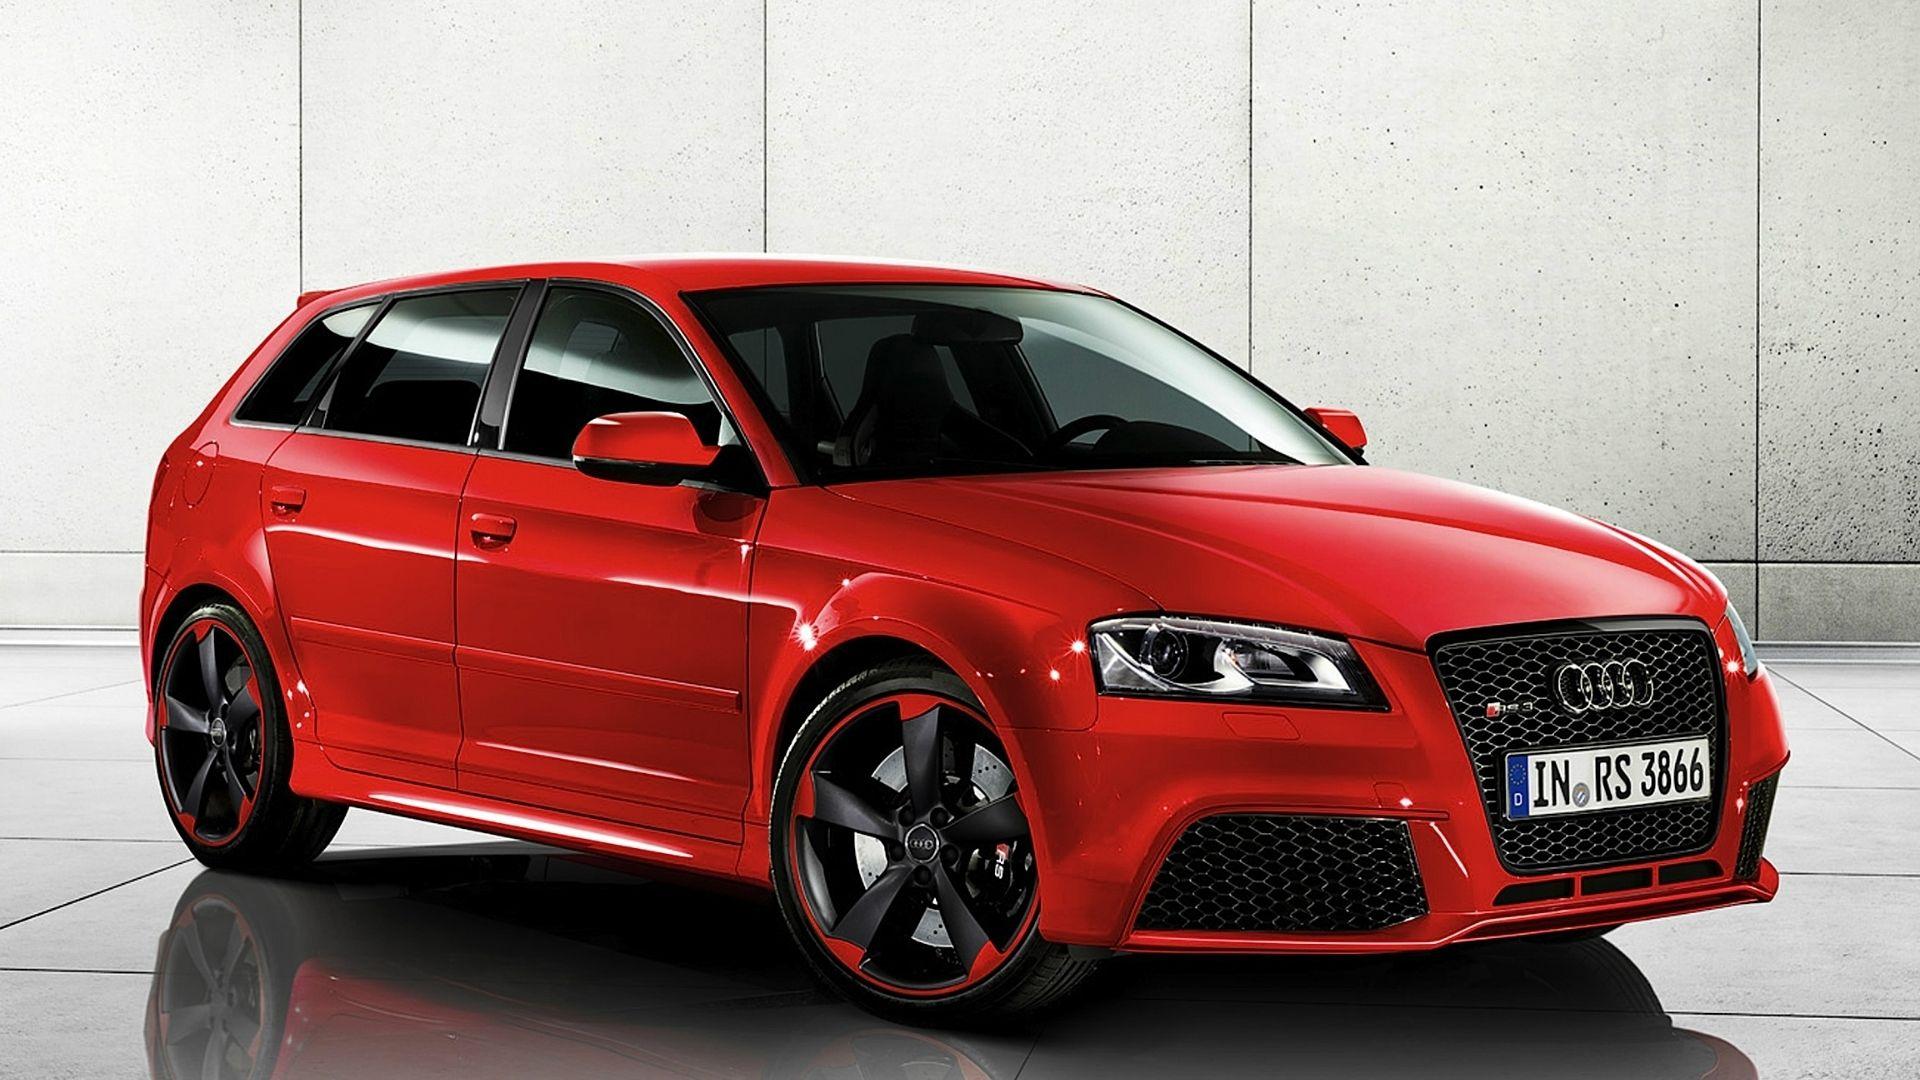 Audi Rs3 Sportback Image collections Wallpaper Free